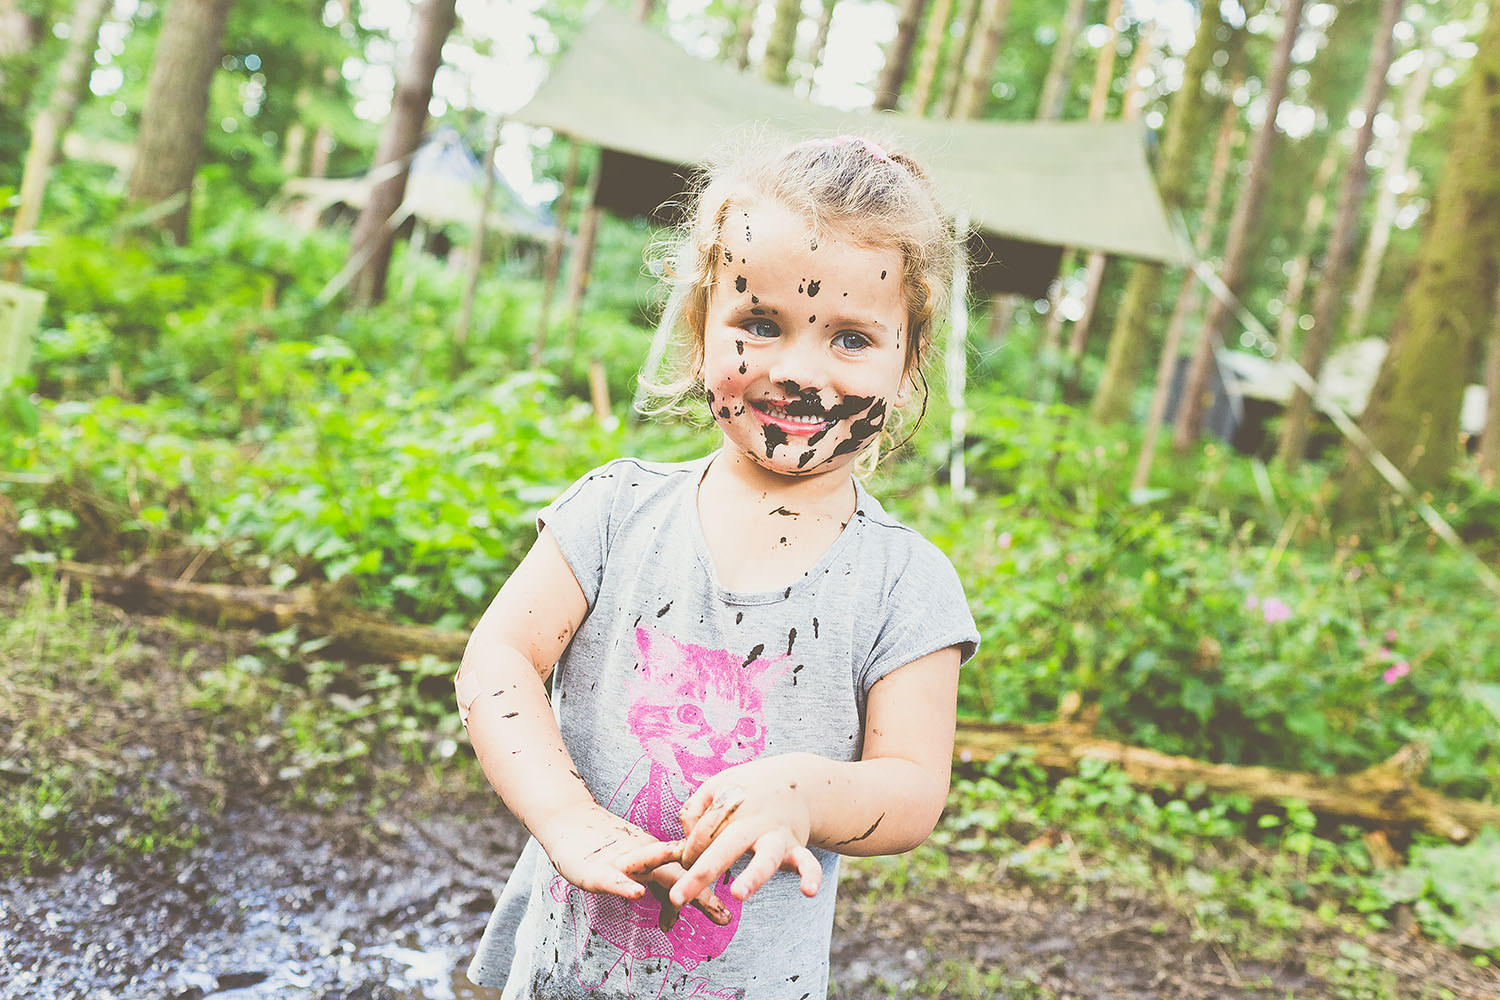 A small child with mud on her face.